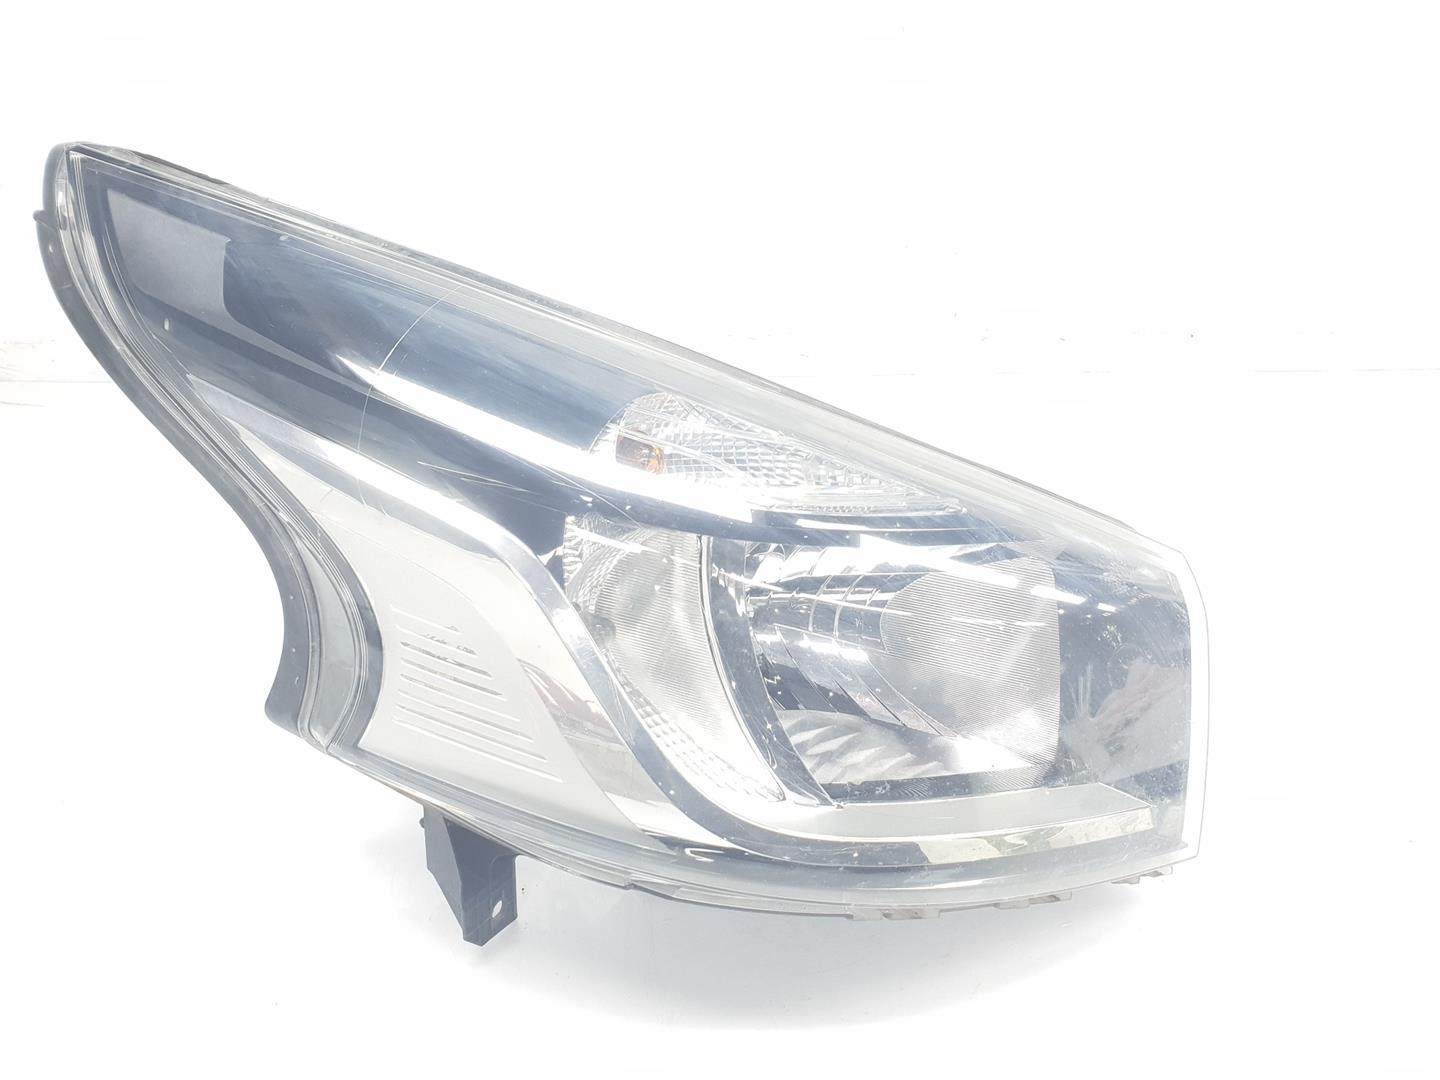 RENAULT Trafic 2 generation (2001-2015) Front Right Headlight 260109424R, 260109424R 24238936